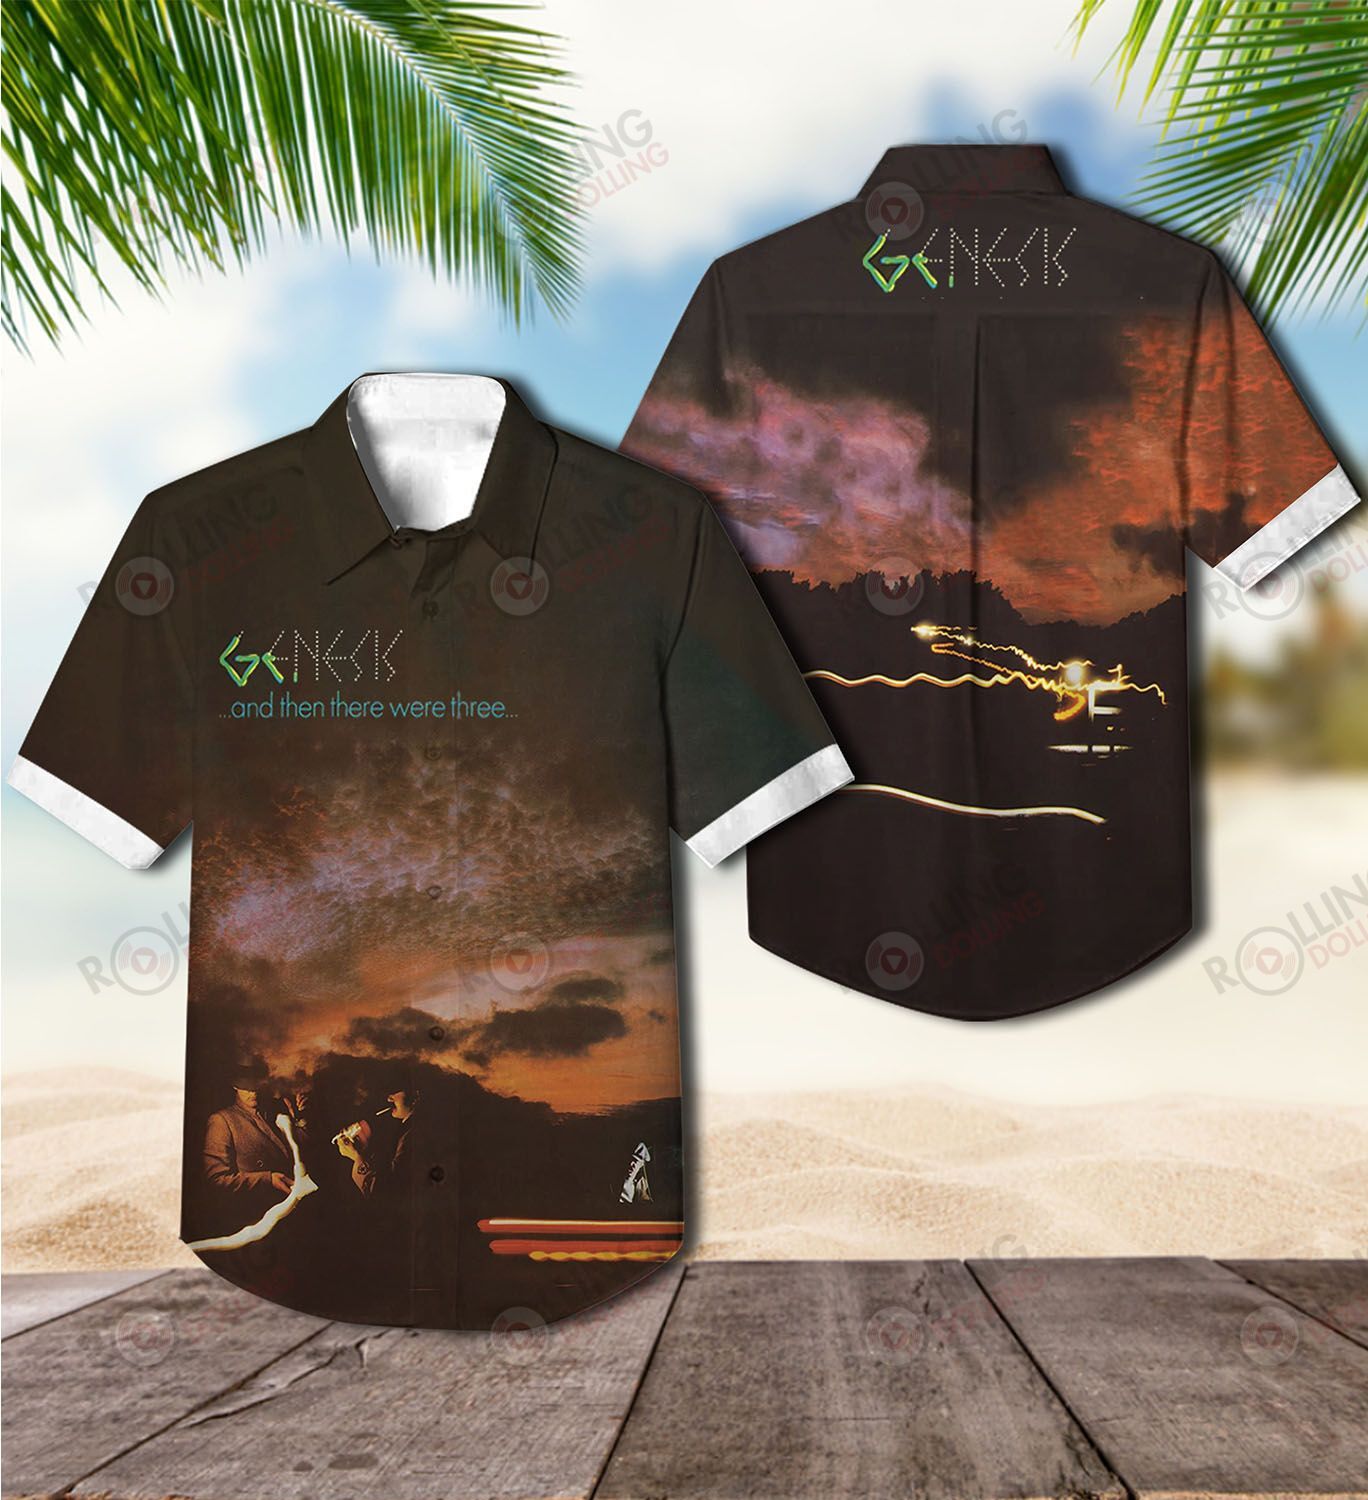 Now you can show off your love of all things band with this Hawaiian Shirt 157